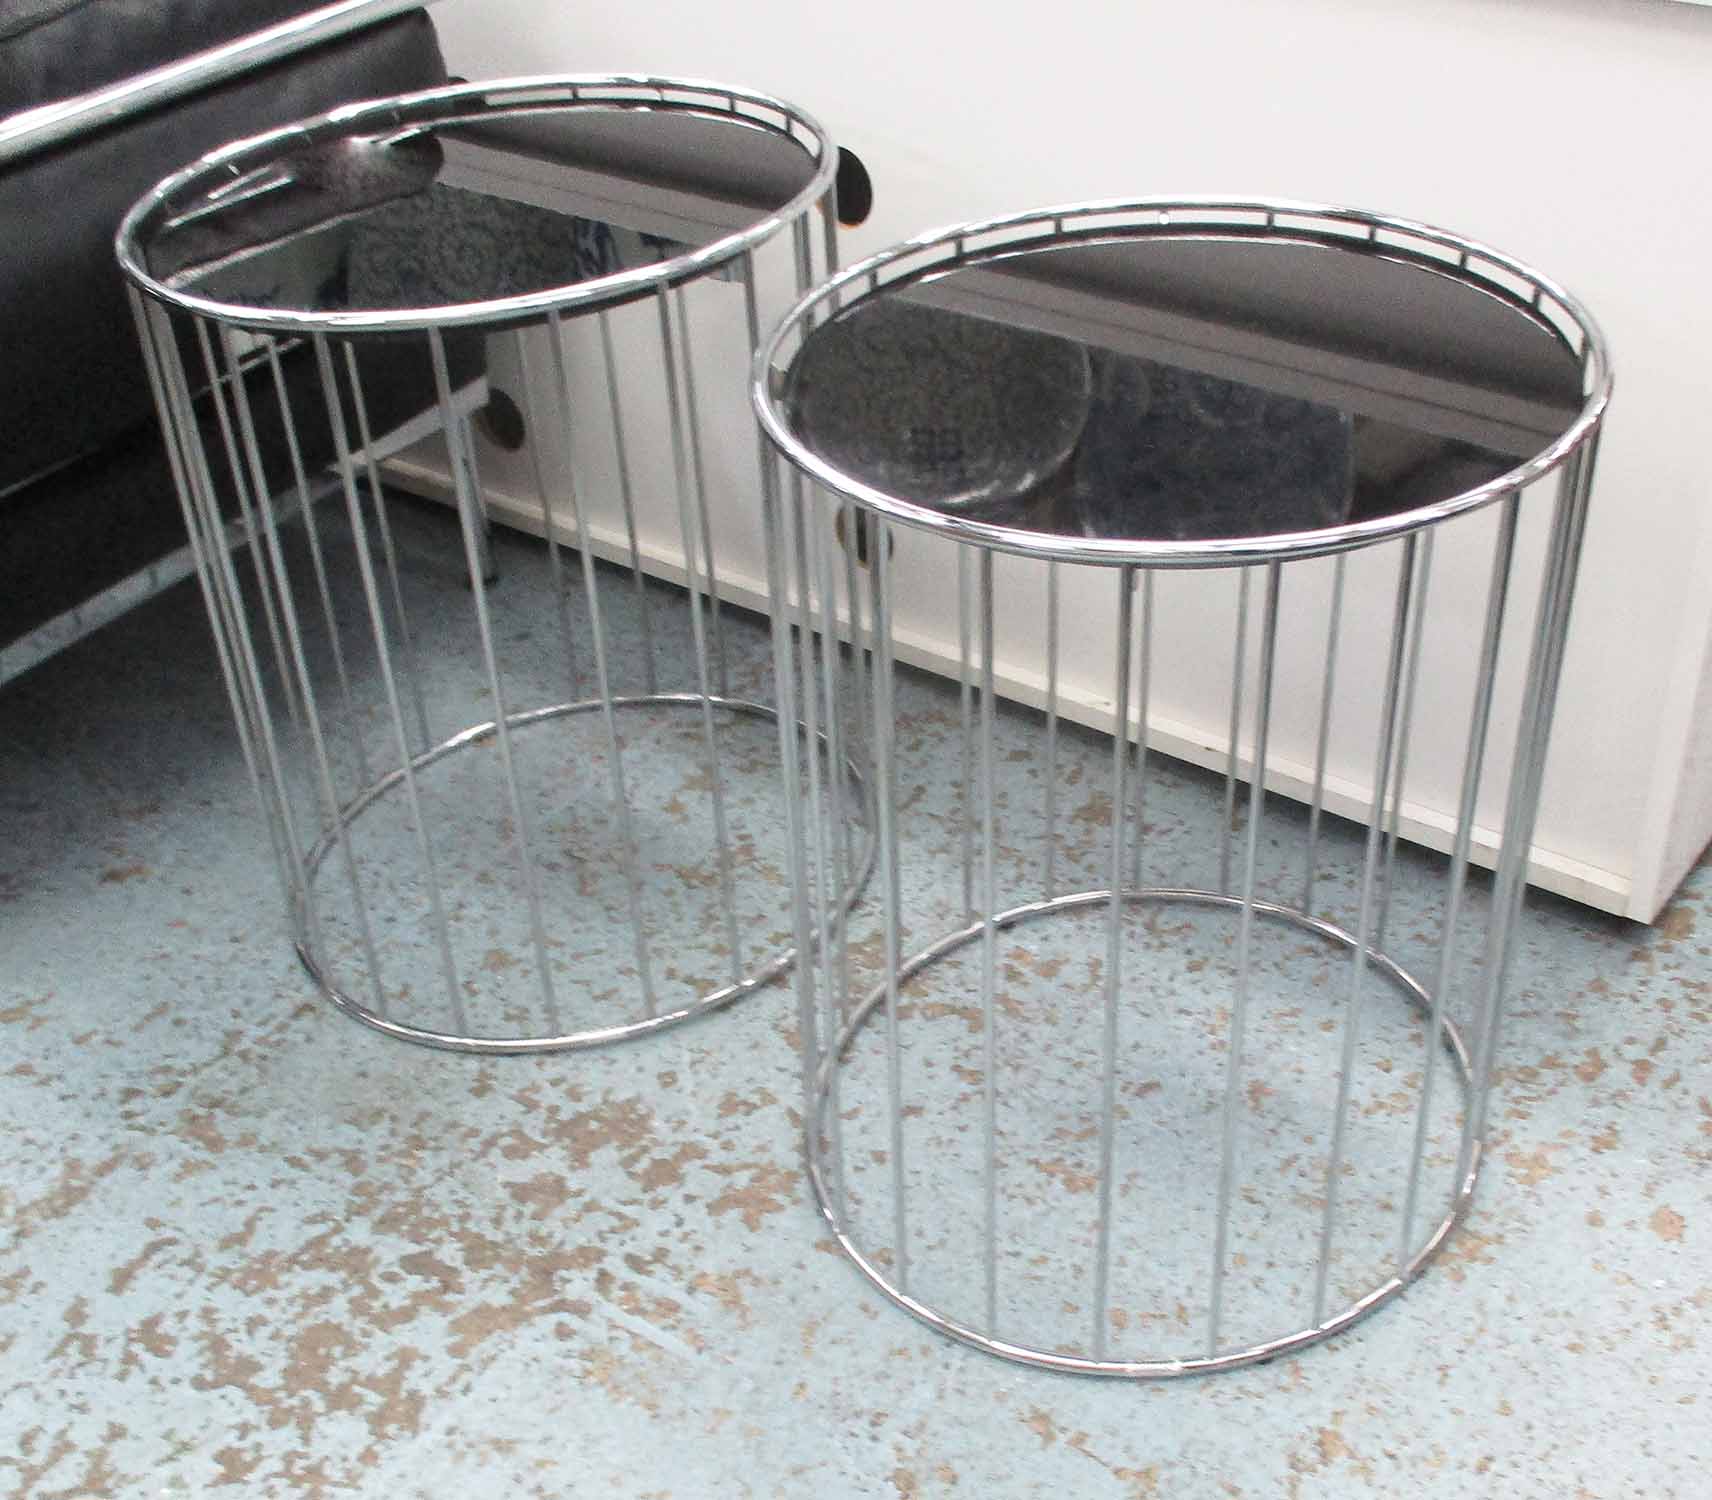 SIDE TABLES, a pair, by Minotti, 45cm x 58cm H.